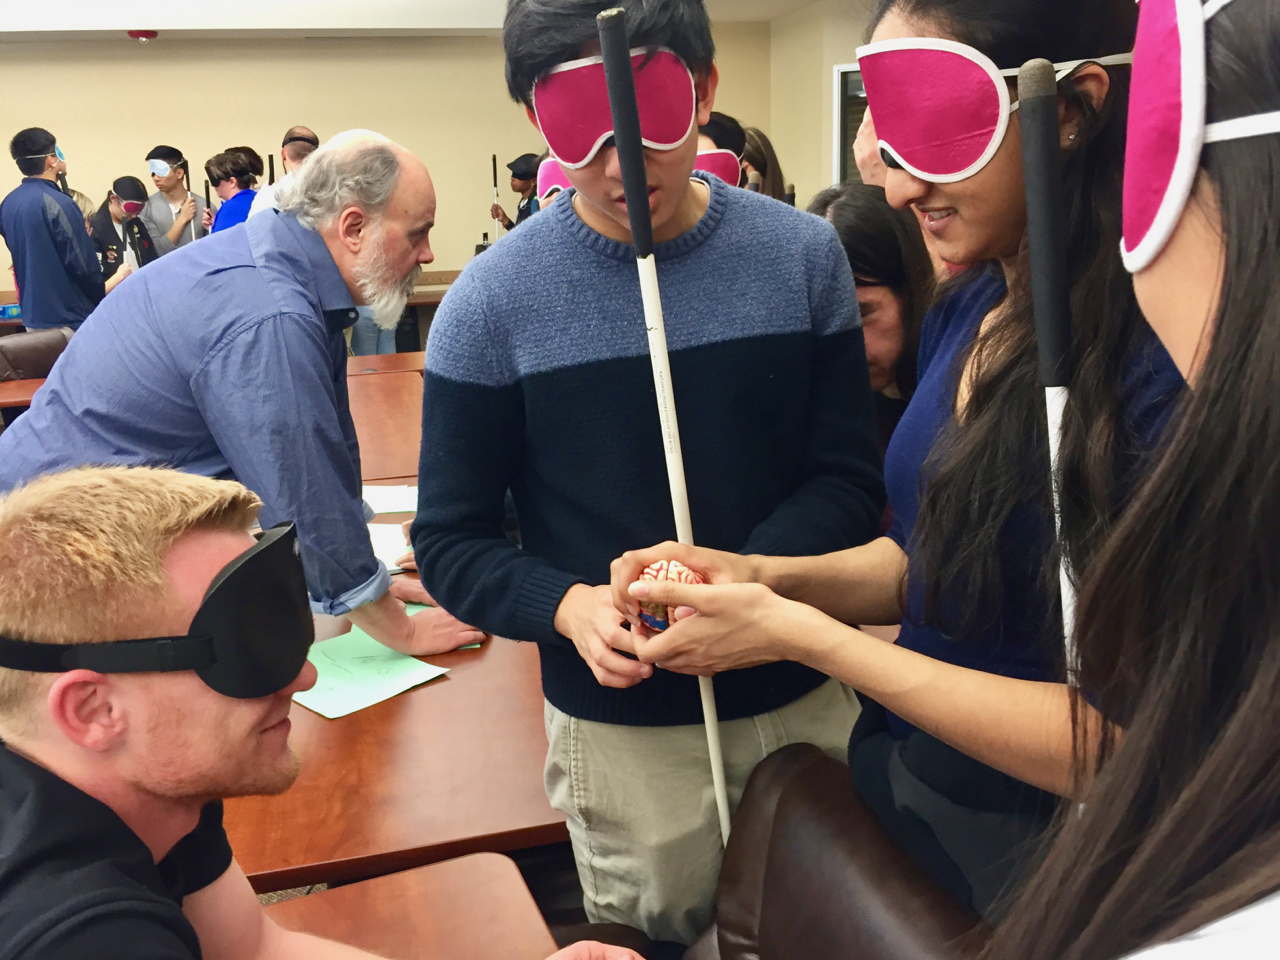 Students in sleepshades examine the mode of a brain on the table between them